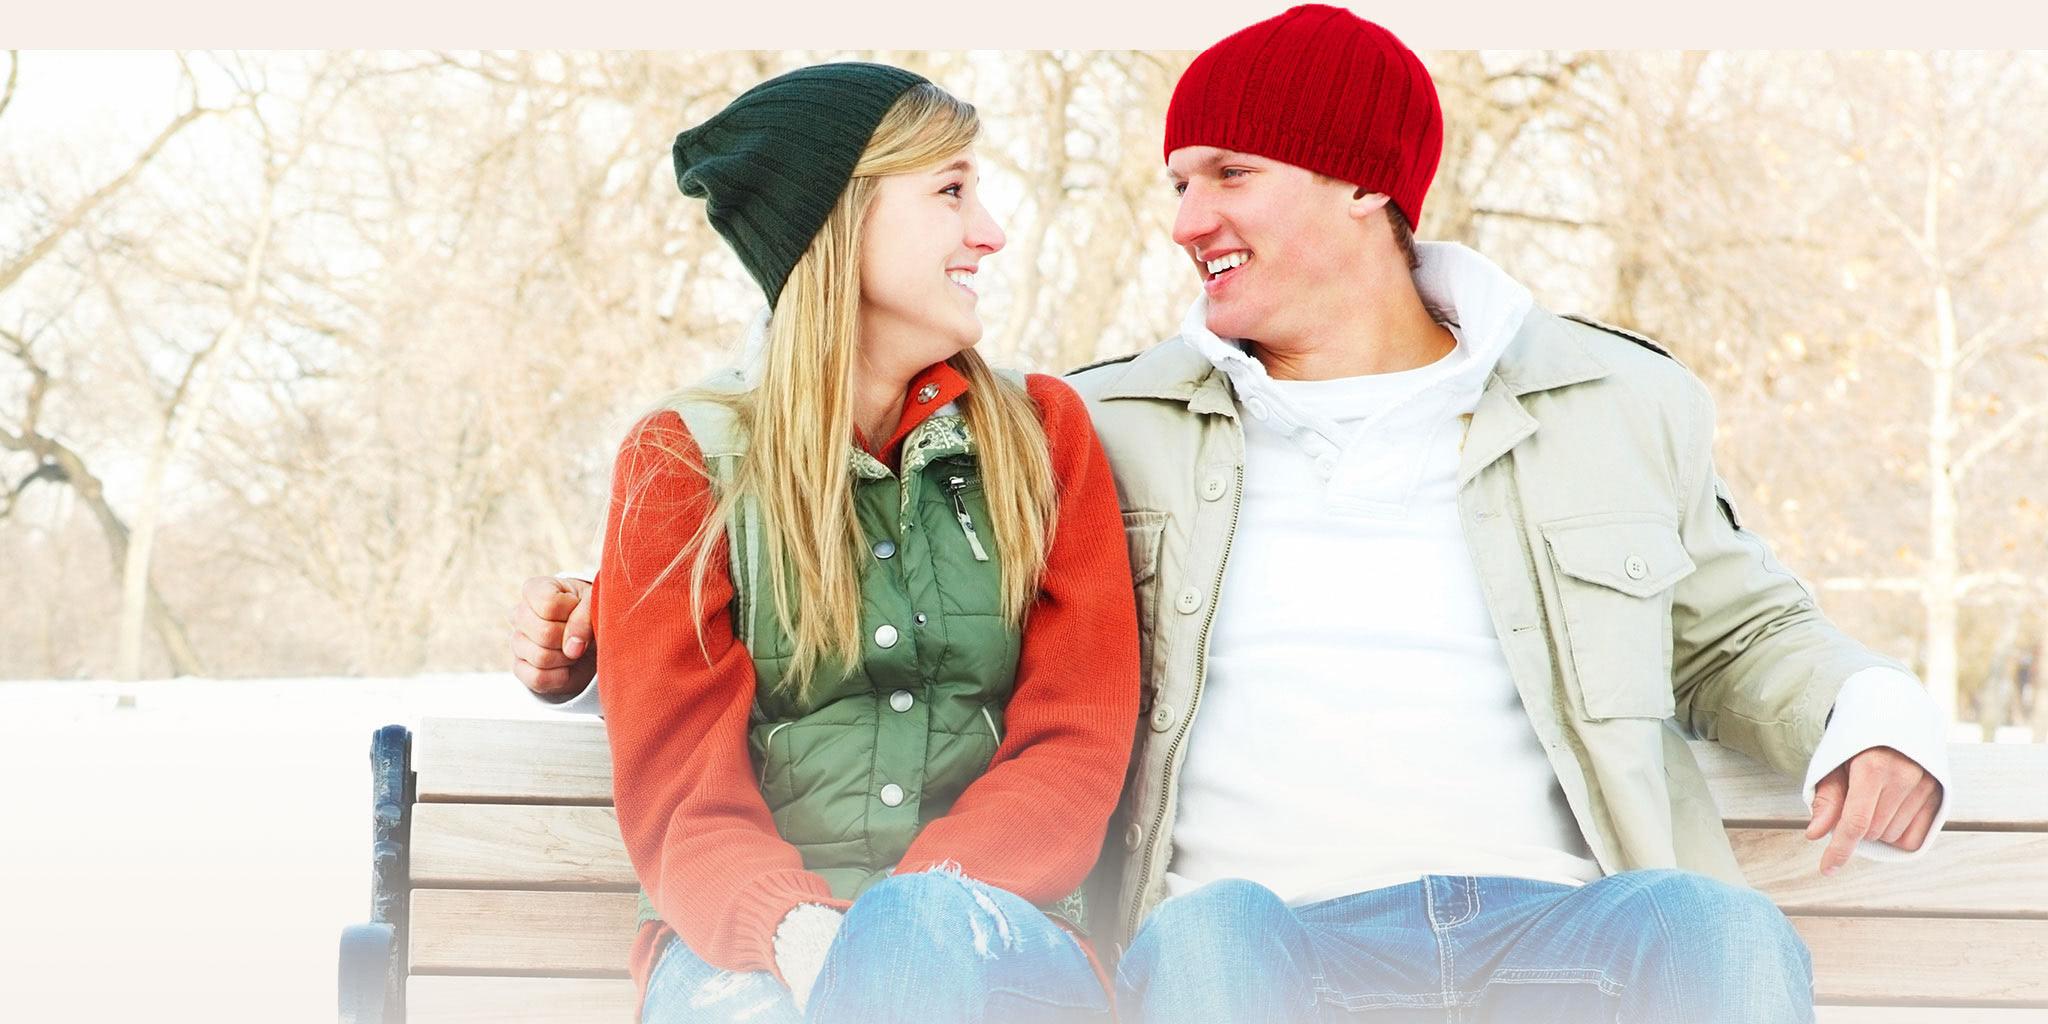 A couple on a bench in winter with stocking caps on